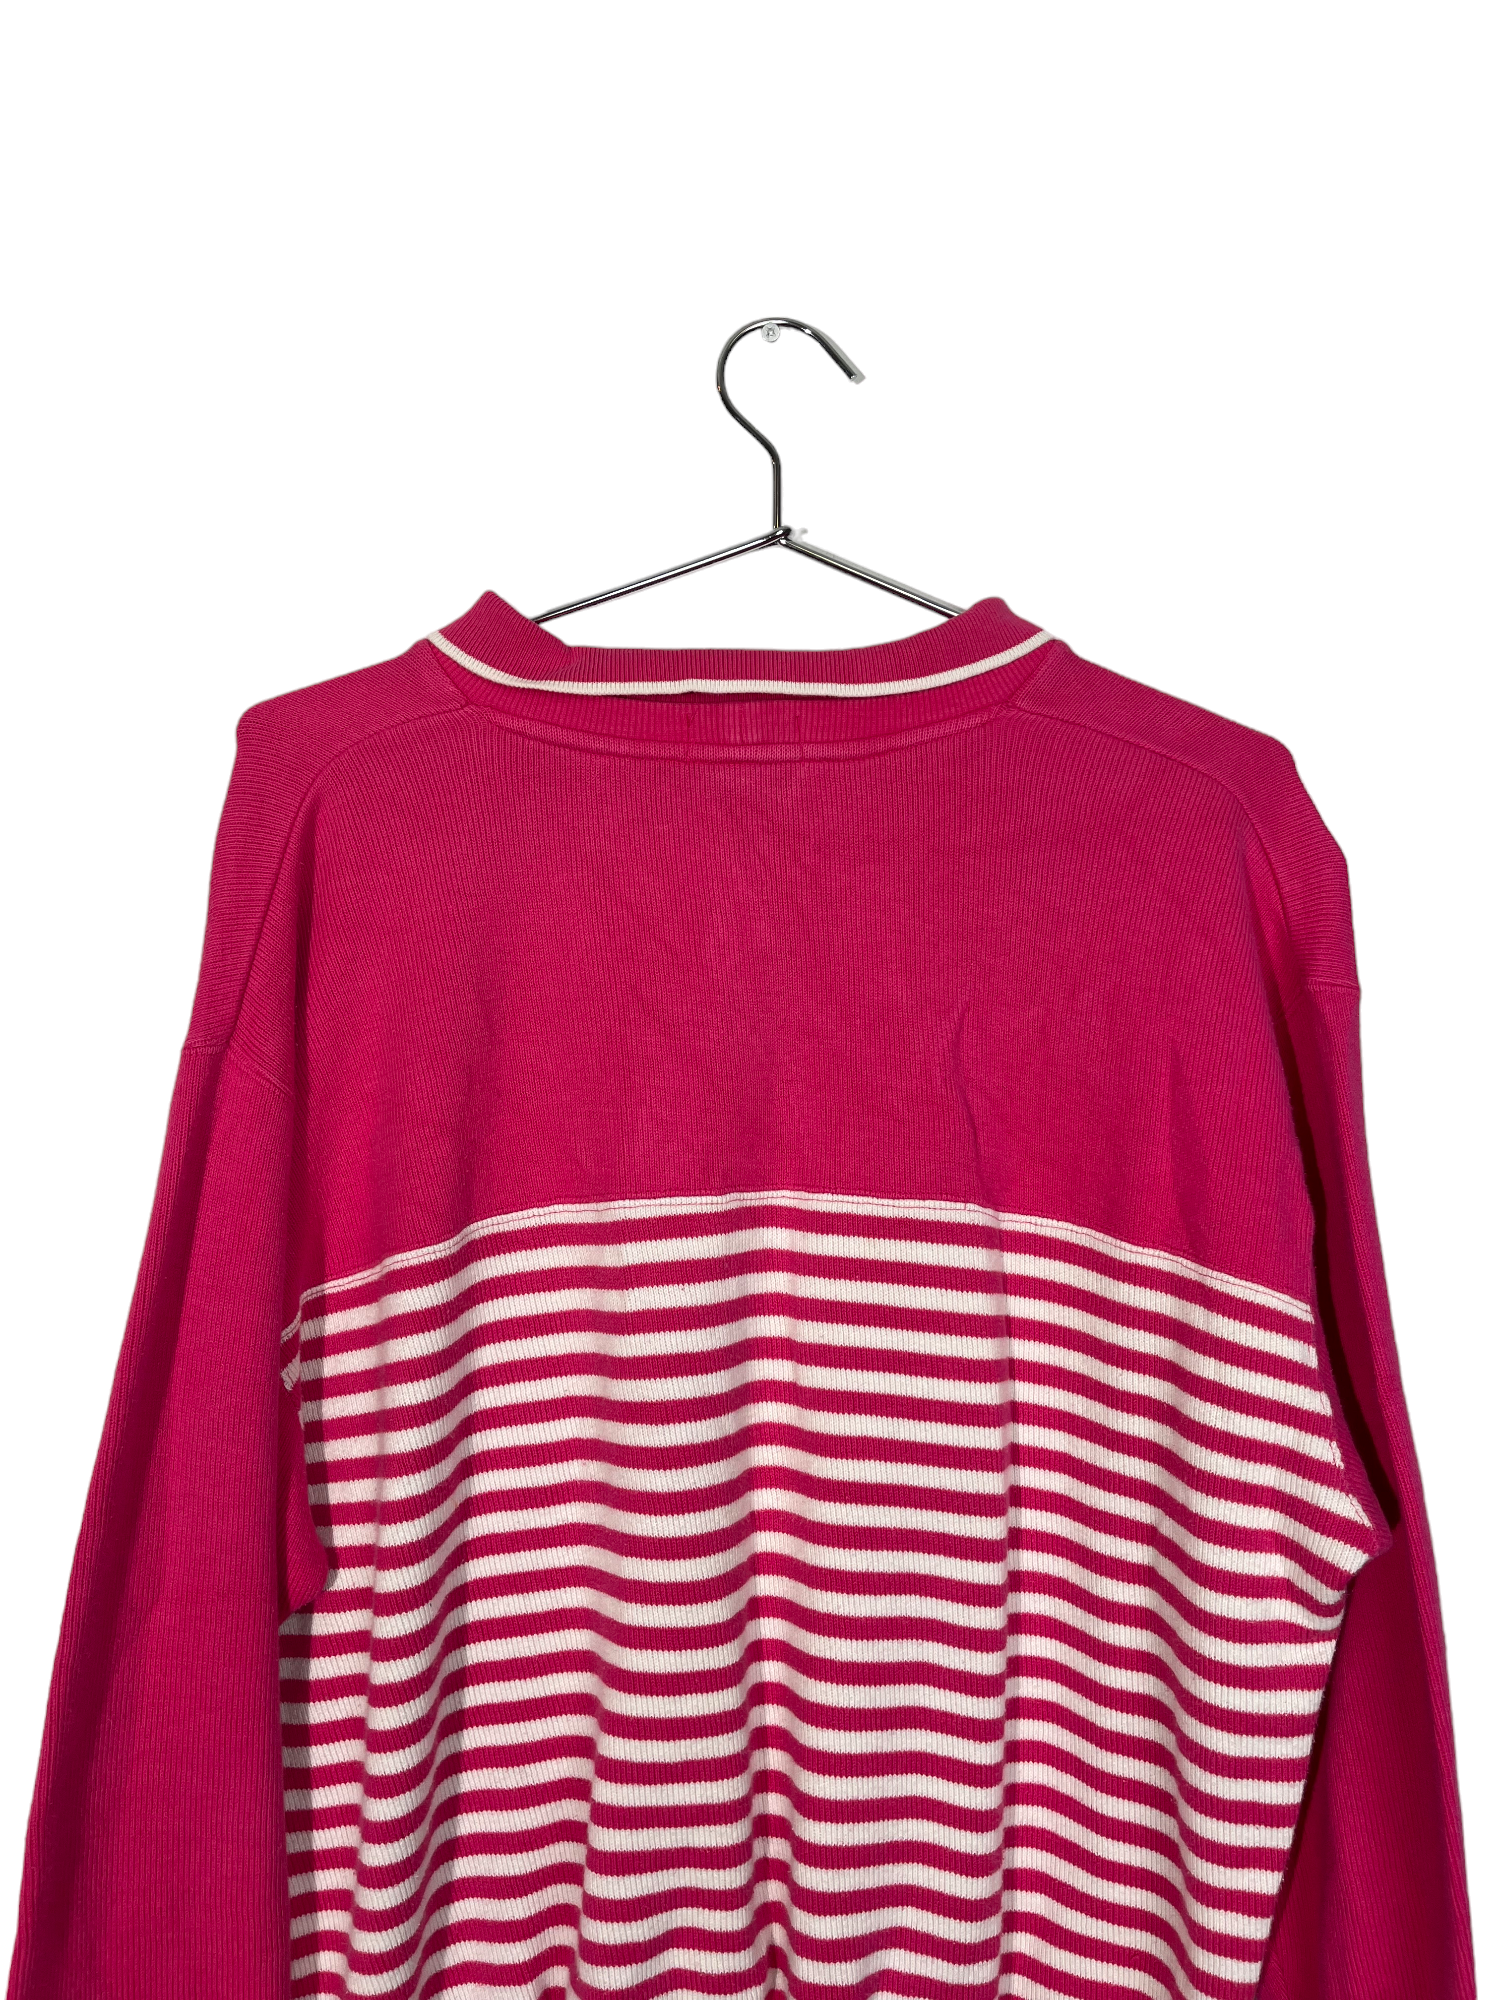 Pink & White Striped Collared Sweater